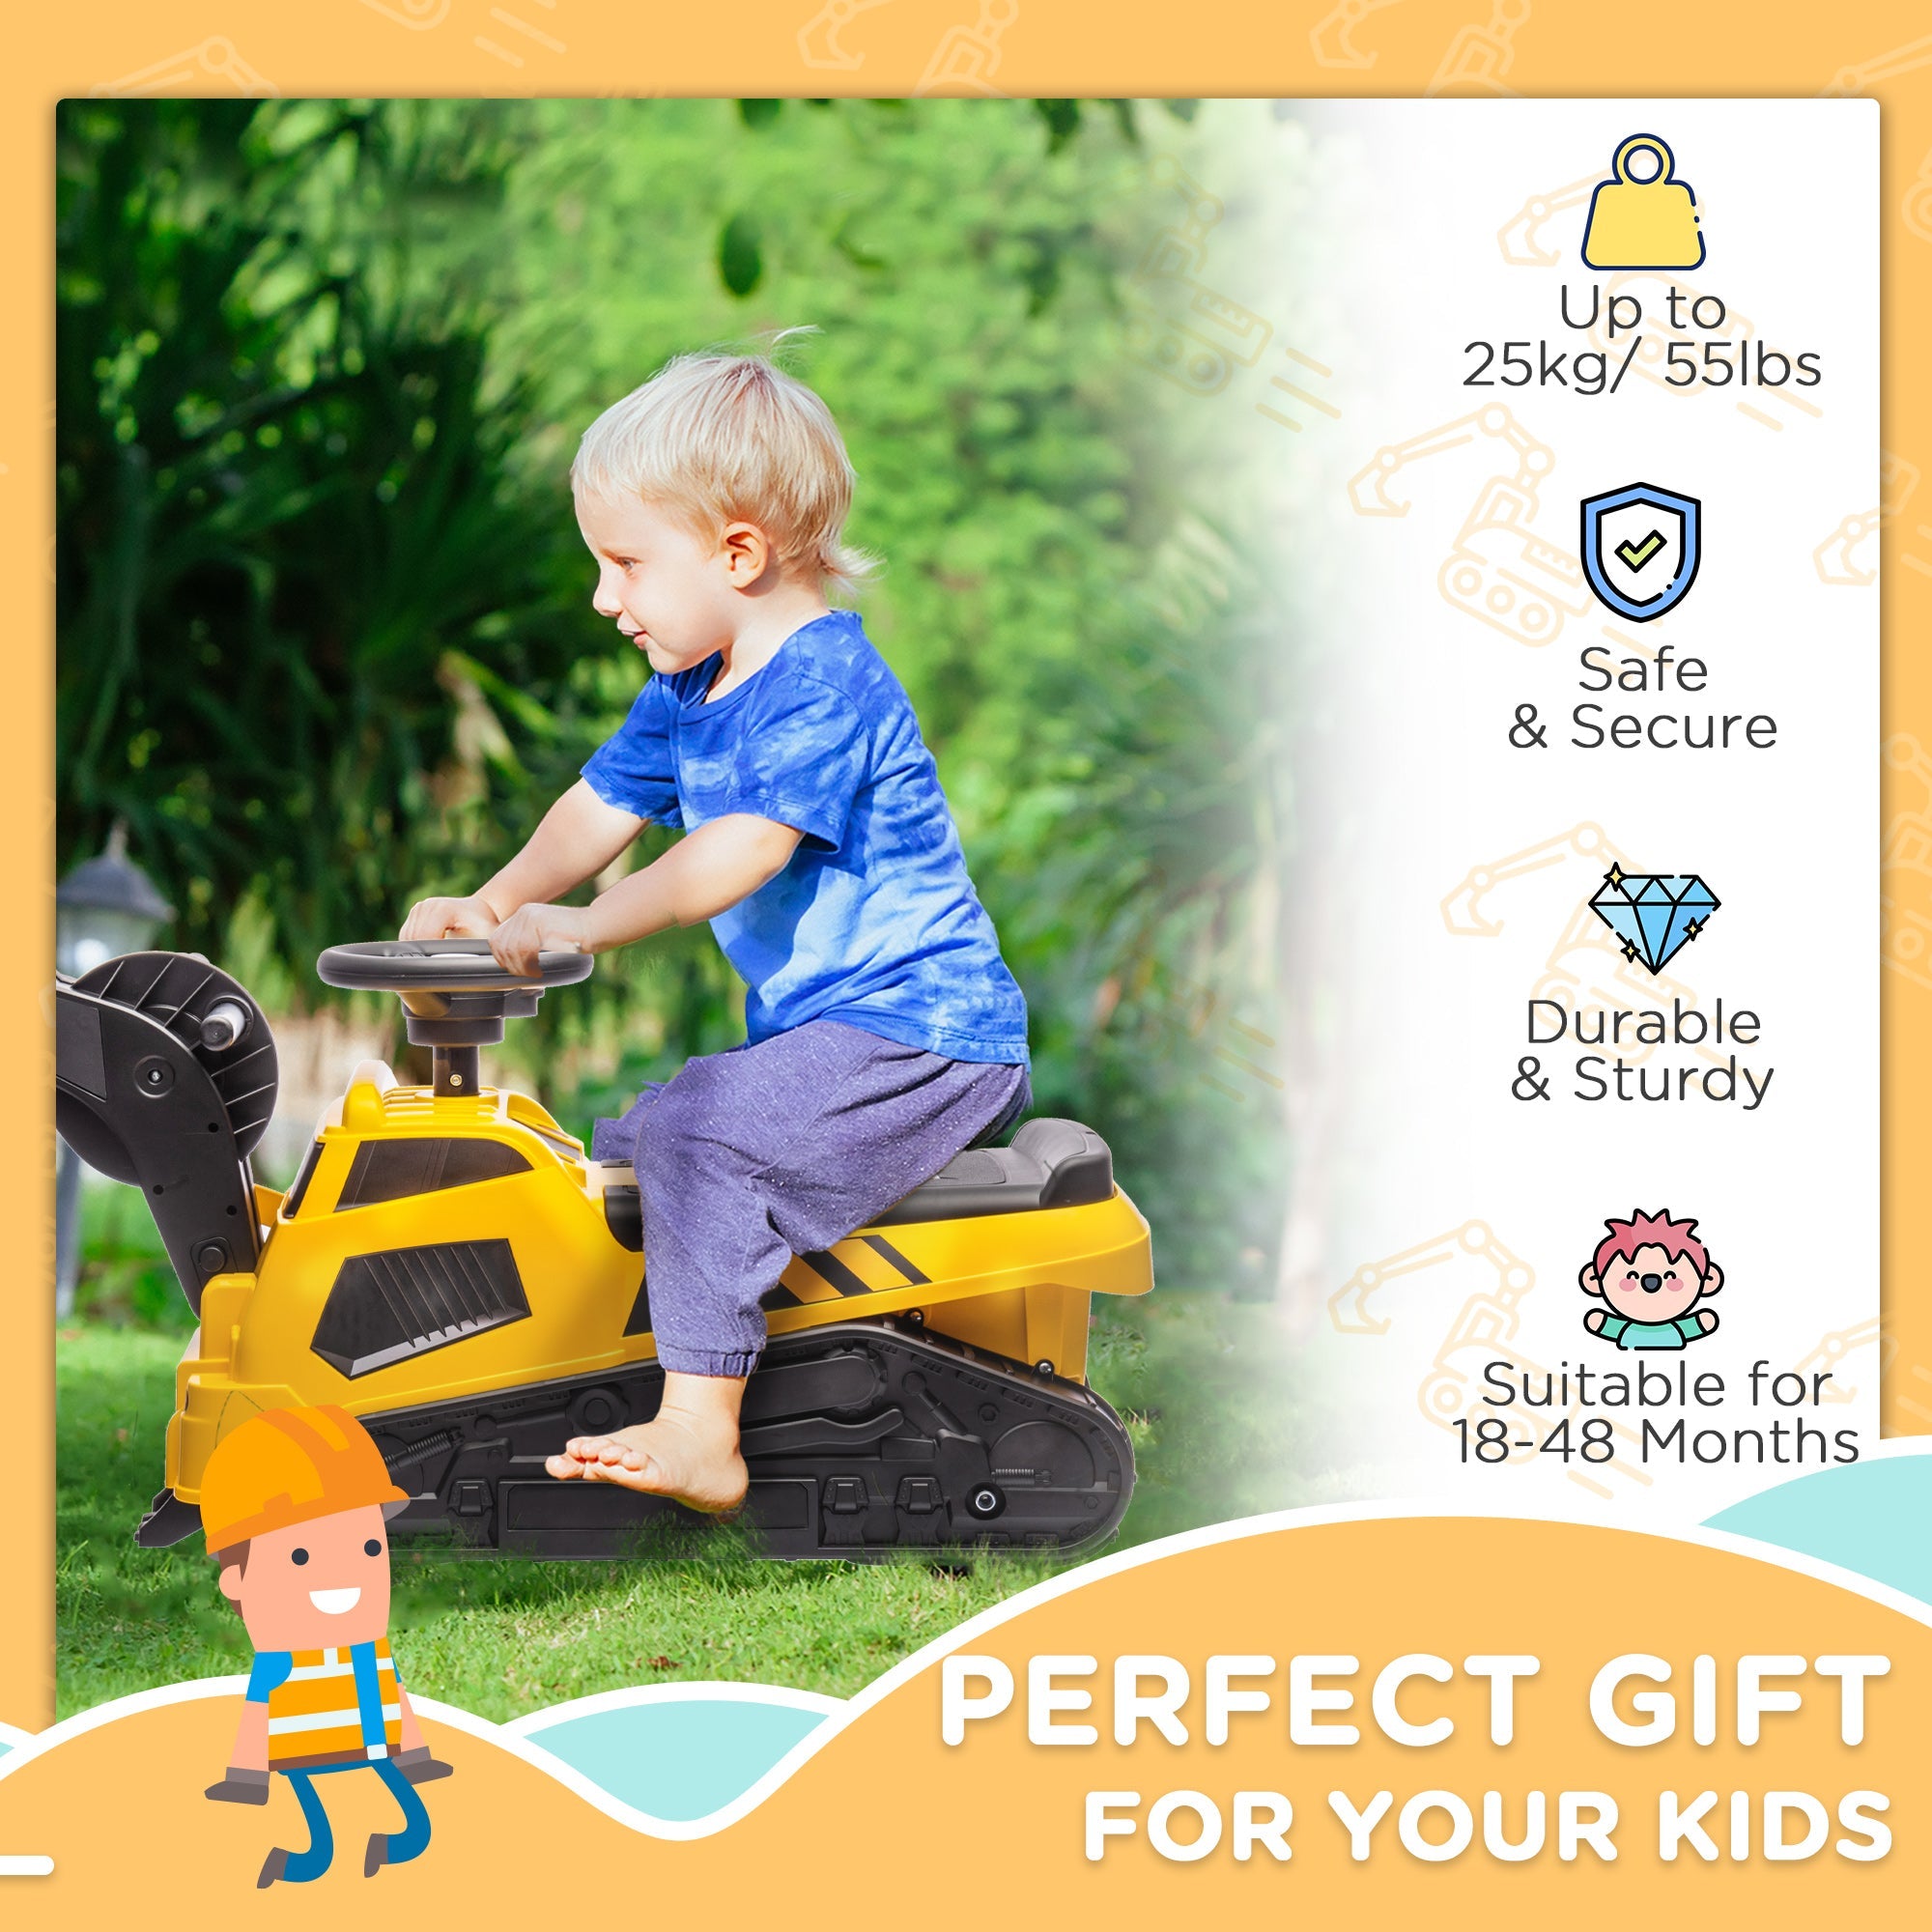 HOMCOM Ride on Tractor, 3 in 1 Ride on Excavator, Bulldozer, Road Roller, Pretend Play Construction No Power Truck w/ Music, for 18-48 Months, Yellow - TovaHaus